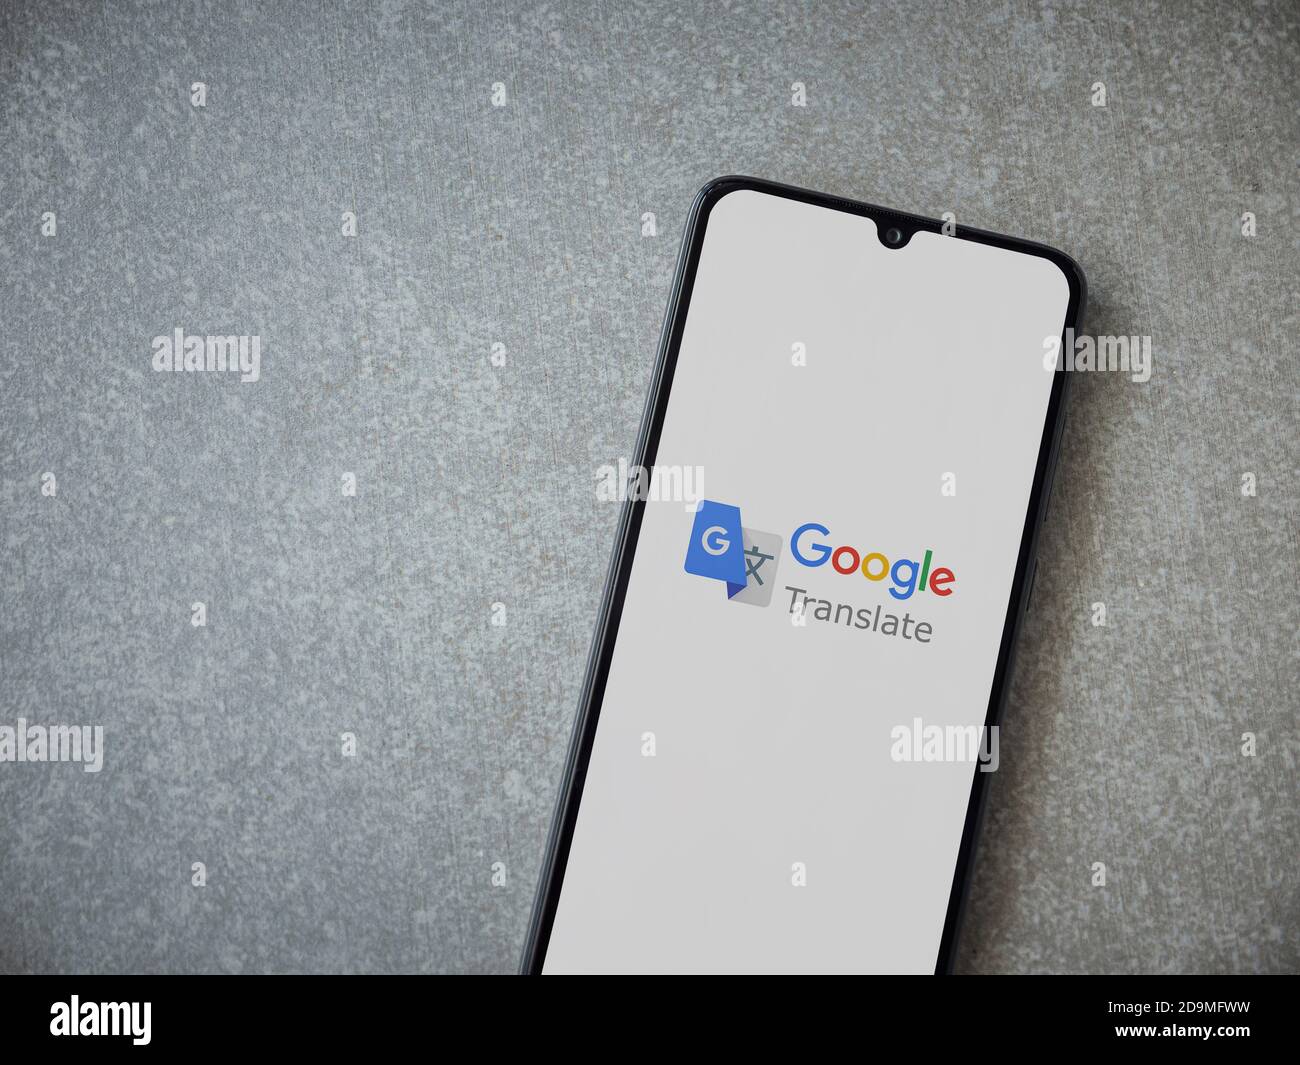 moisture Symphony Sui Lod, Israel - July 8, 2020: Google Translate app launch screen with logo on  the display of a black mobile smartphone on ceramic stone background. Top  Stock Photo - Alamy